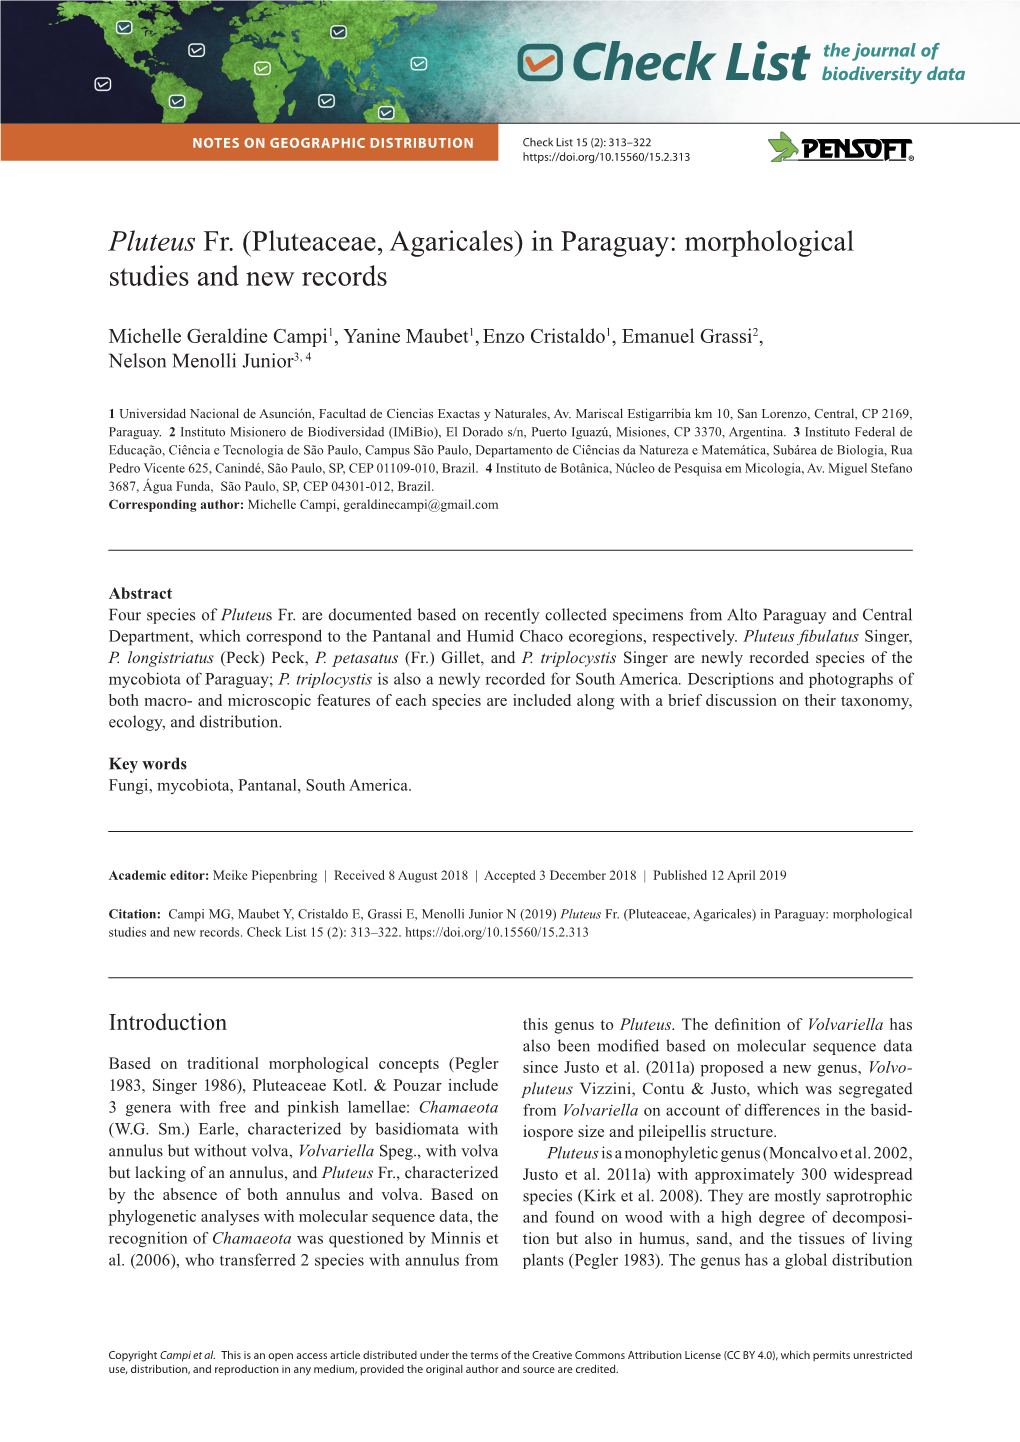 Pluteus Fr. (Pluteaceae, Agaricales) in Paraguay: Morphological Studies and New Records